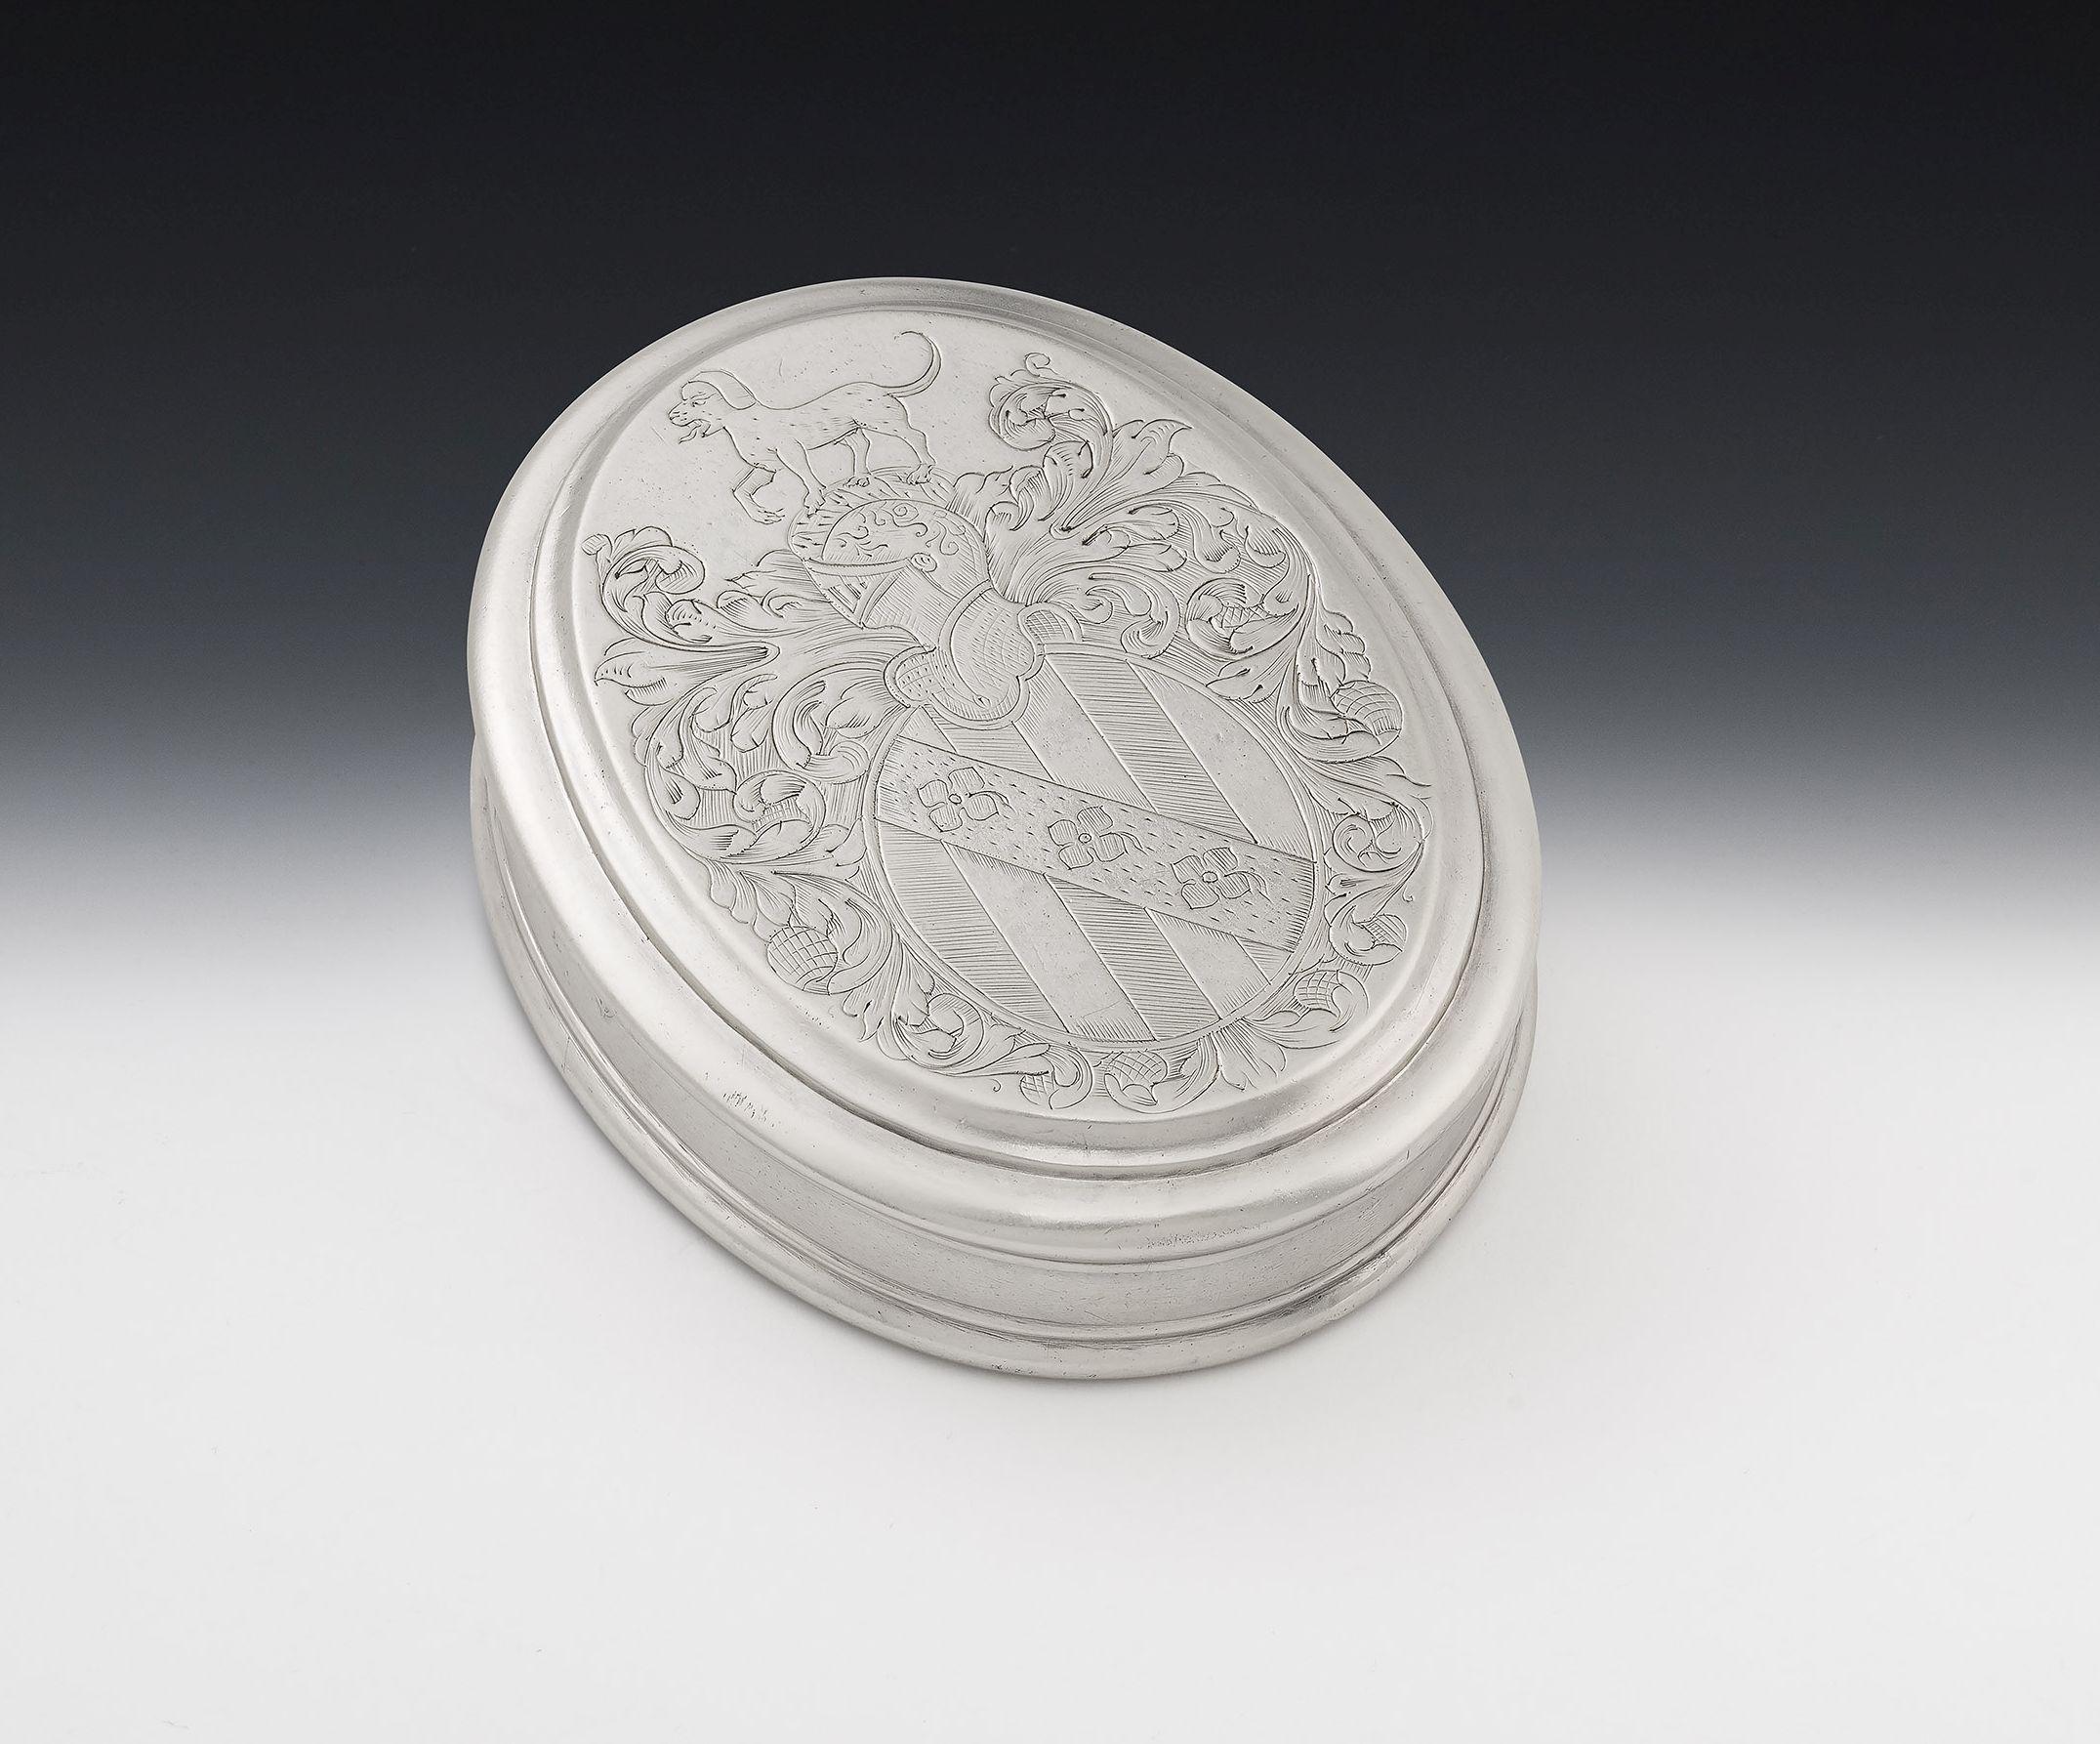 An important Queen Anne Britannia Standard Armorial Tobacco Box made in London in 1709 by Edward Cornock.
This Box is of typical oval form with a reeded edge on the base. This example has a pull-off cover displaying some of the finest engraving